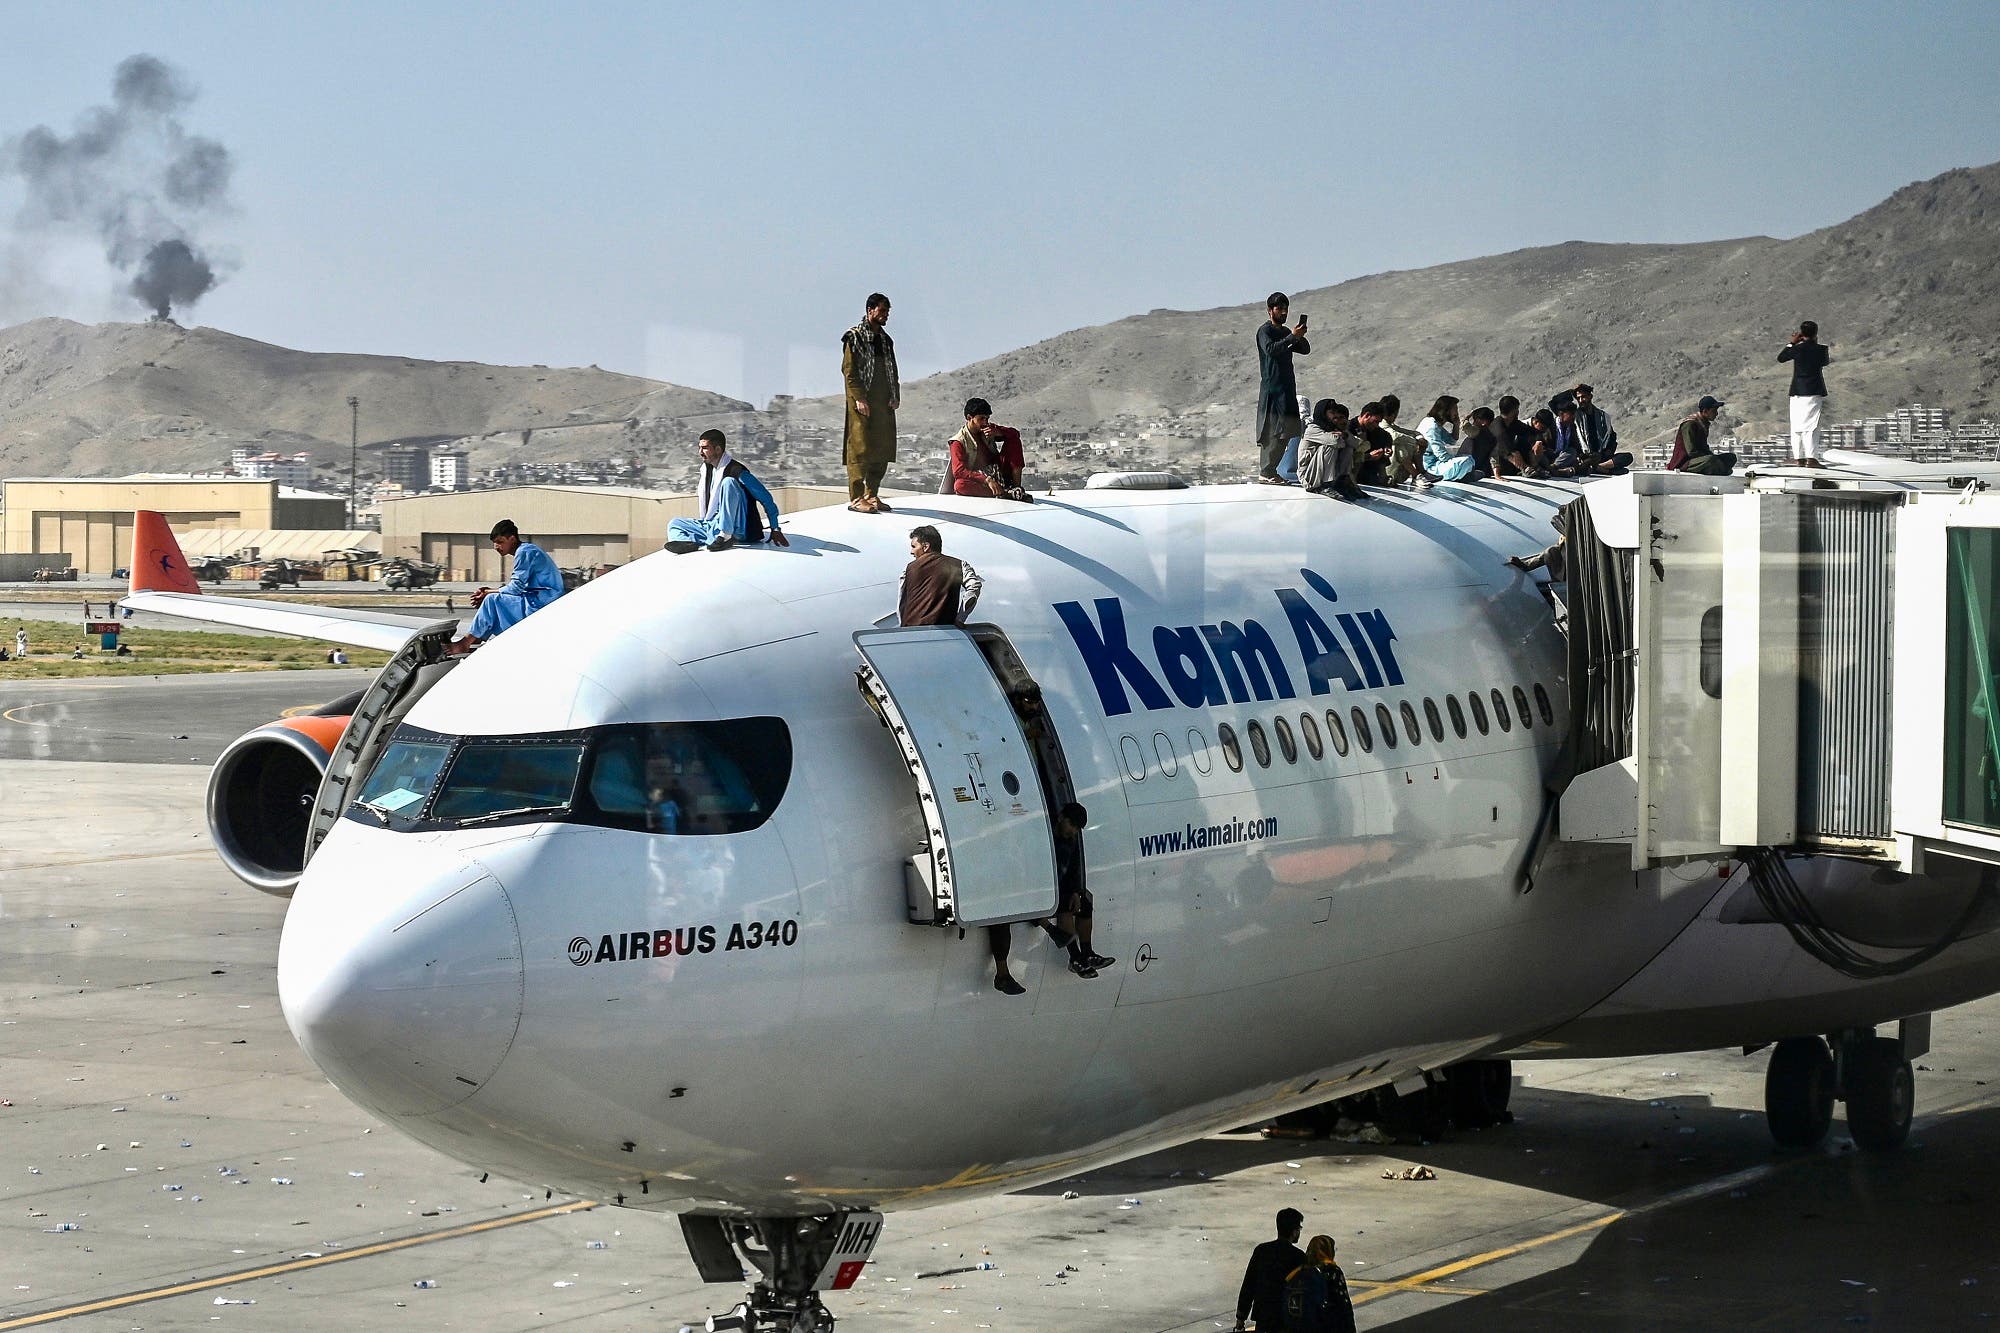 From Kabul airport (archive from AFP)